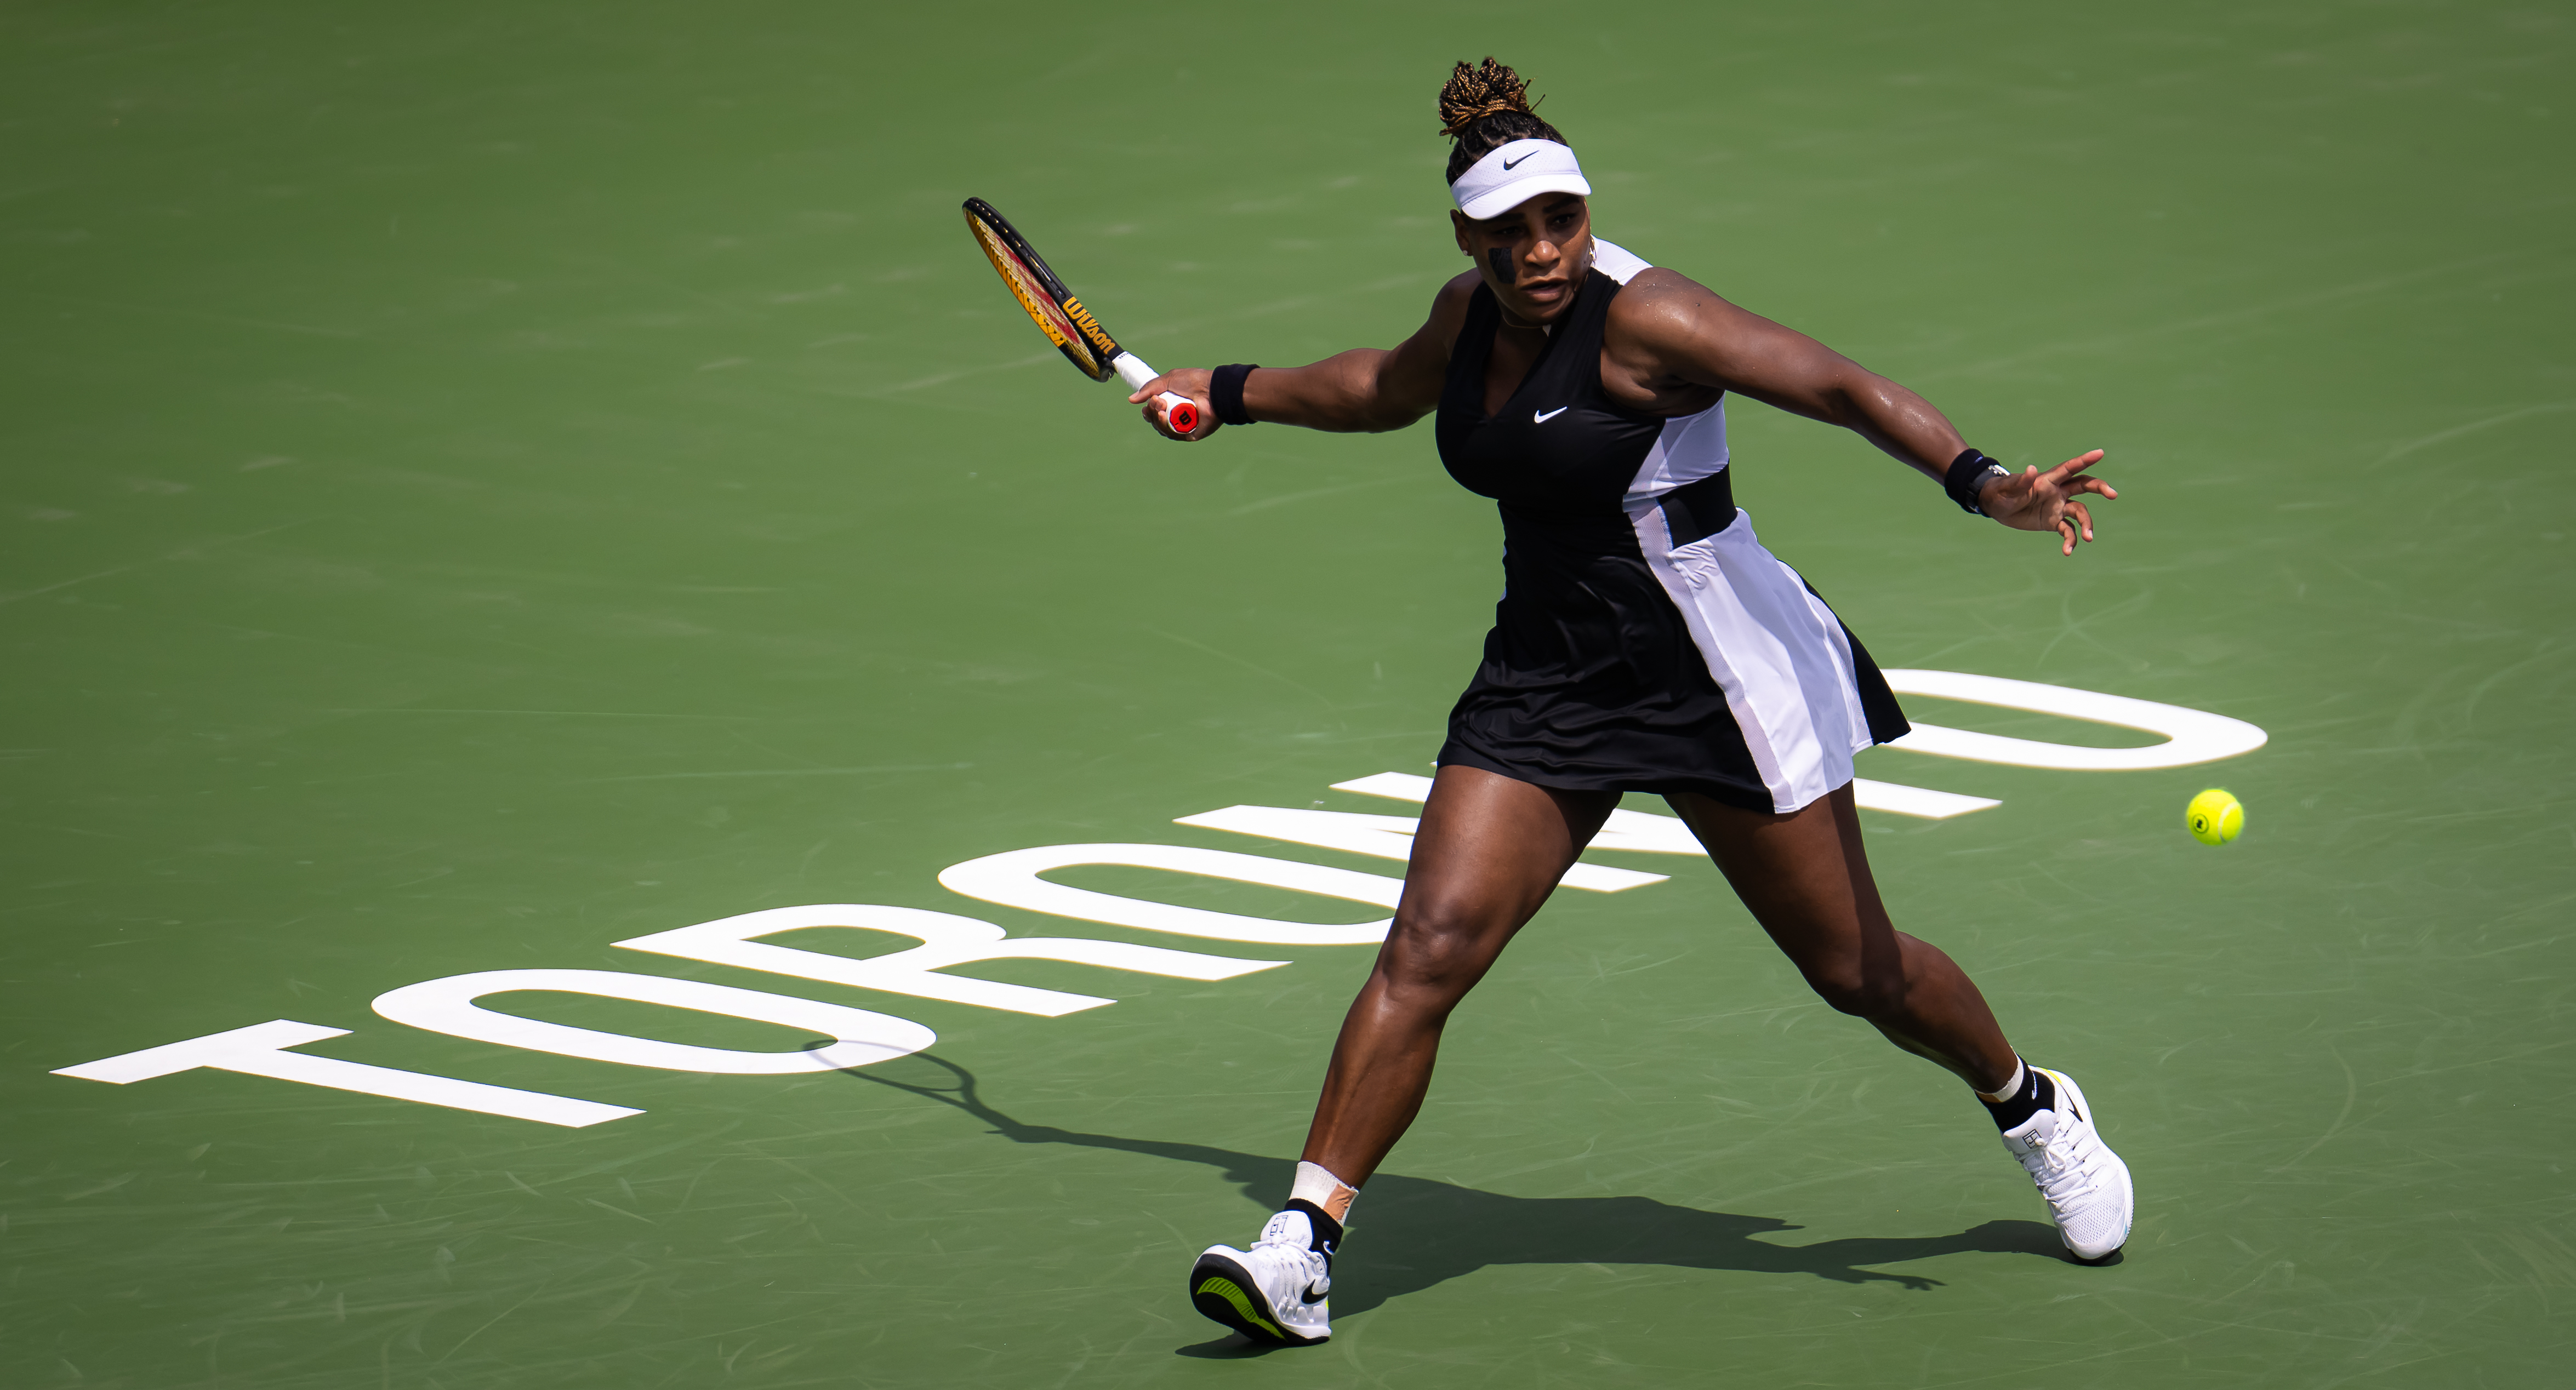 Serena Williams says shes walking away from tennis after U.S